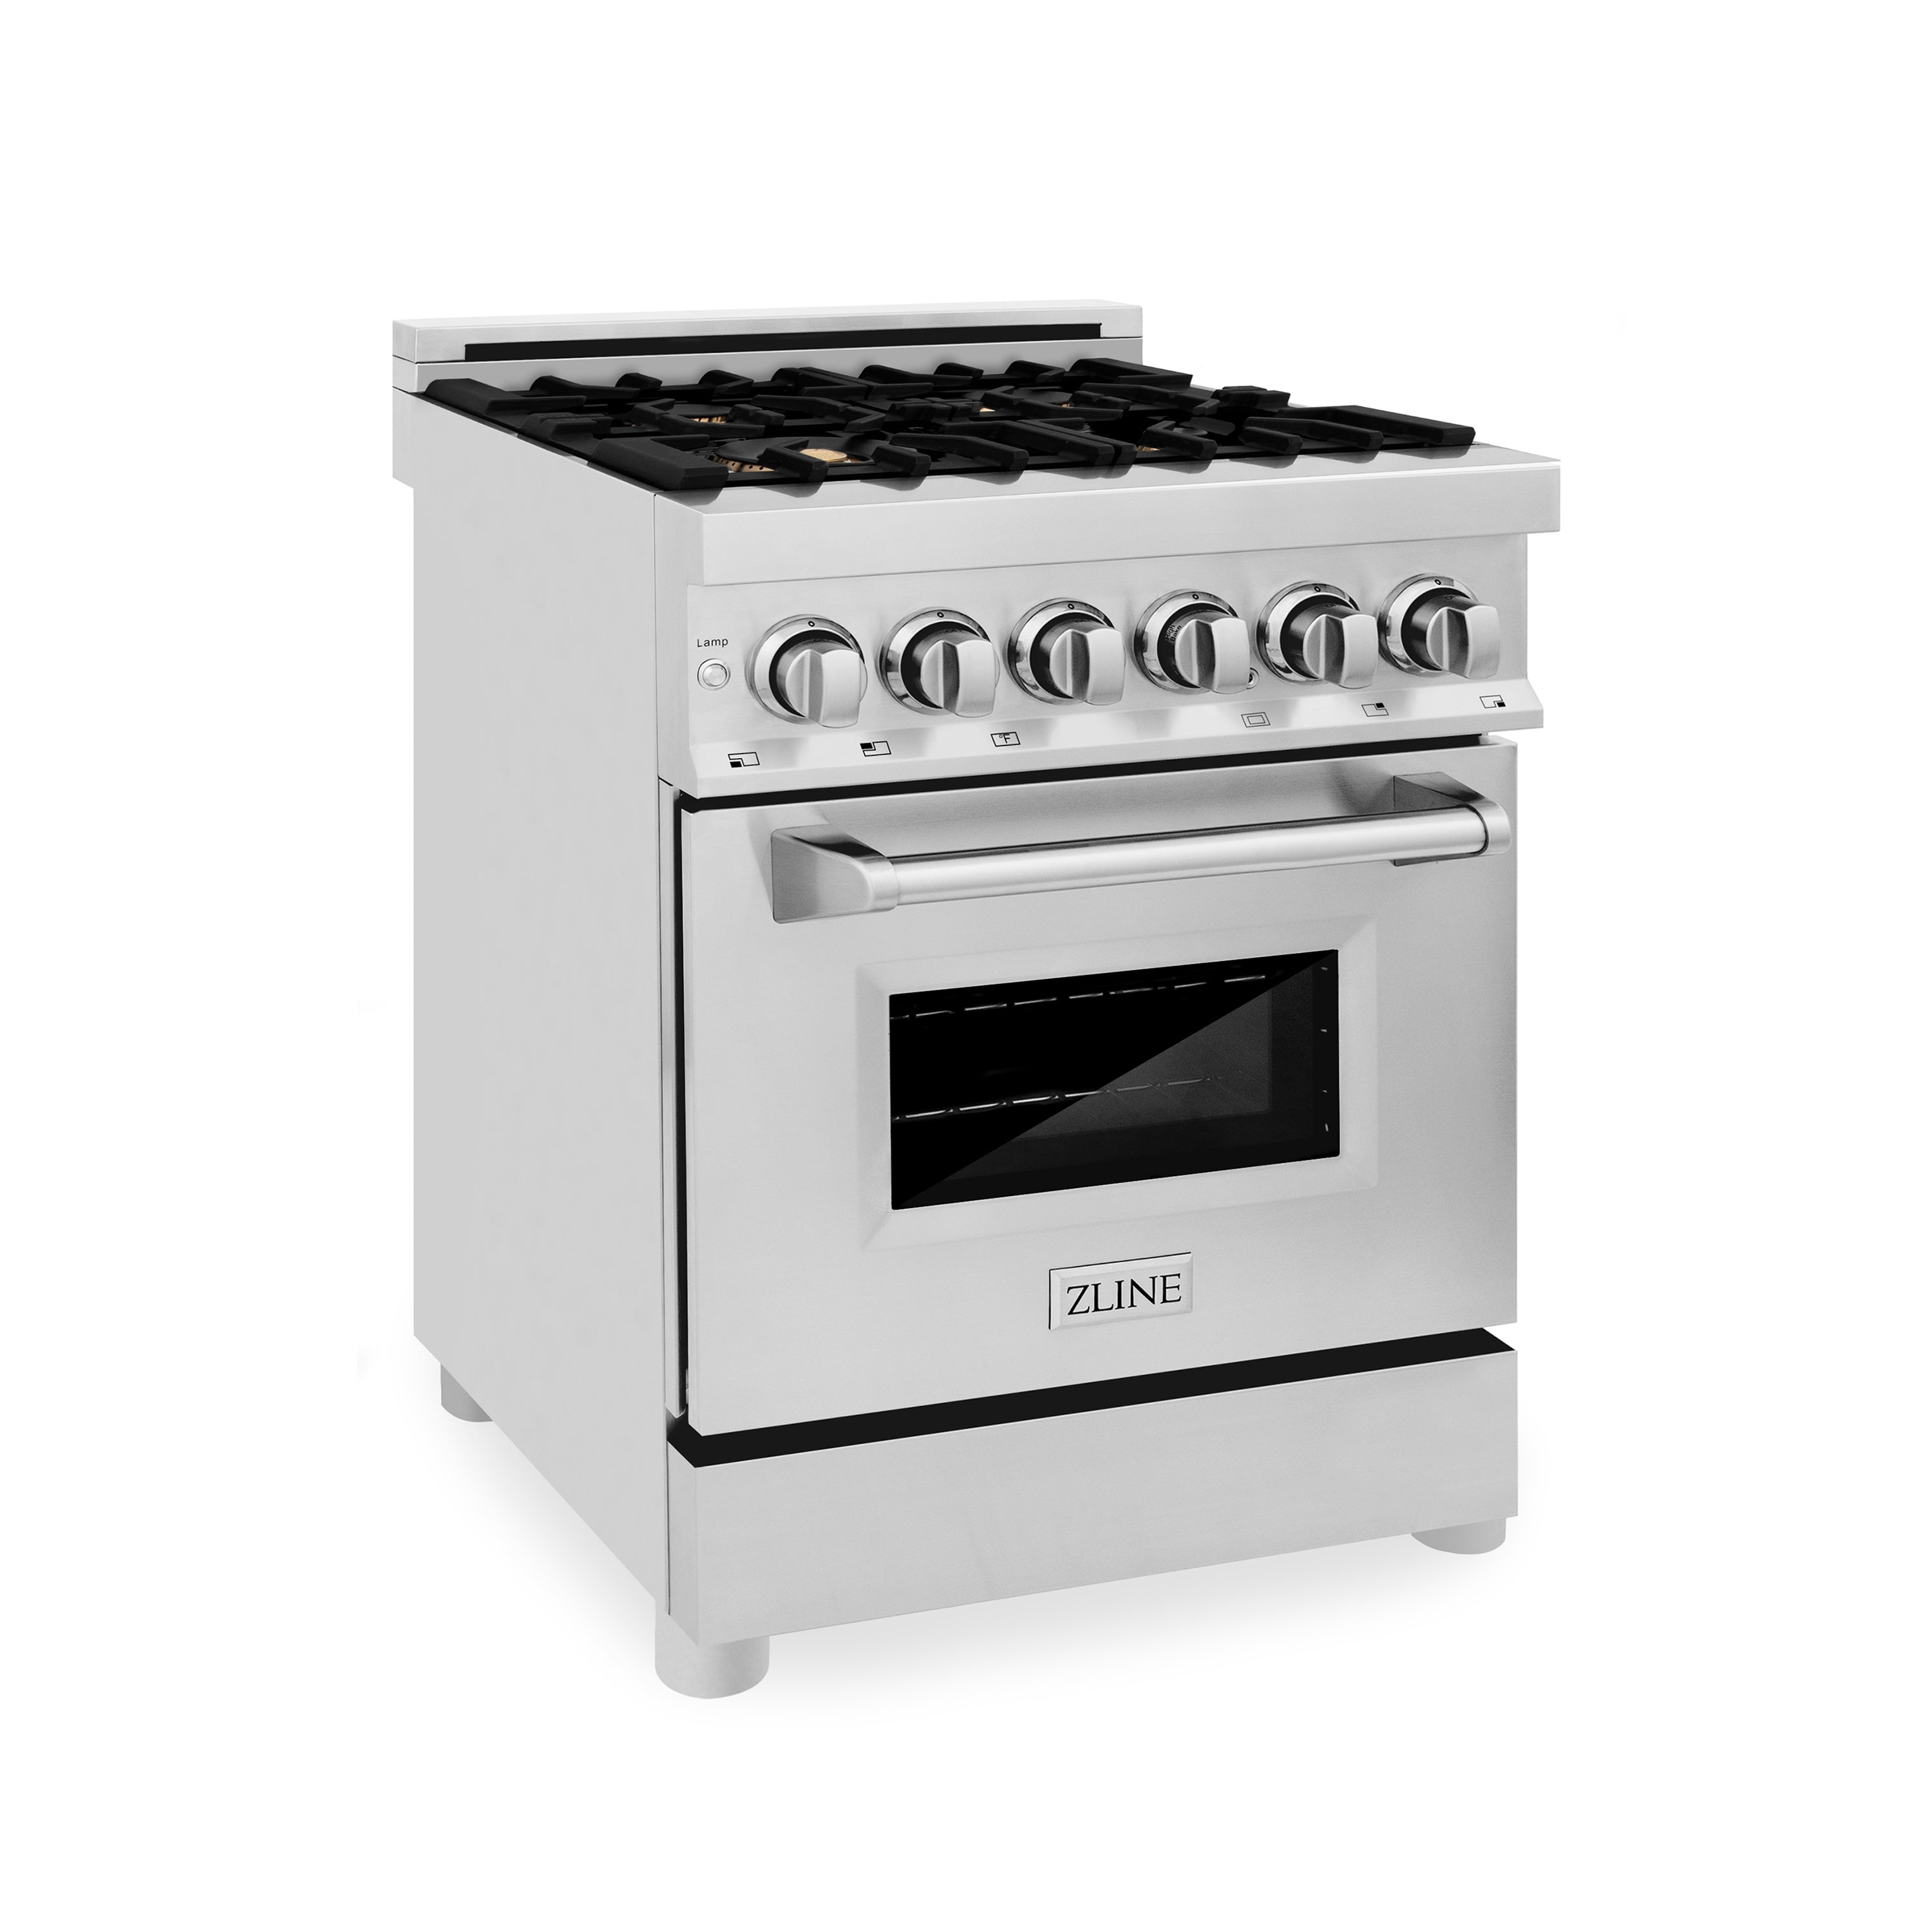 ZLINE 24" 2.8 cu. ft. Dual Fuel Range with Gas Stove and Electric Oven in Stainless Steel with Brass Burners (RA-BR-24)